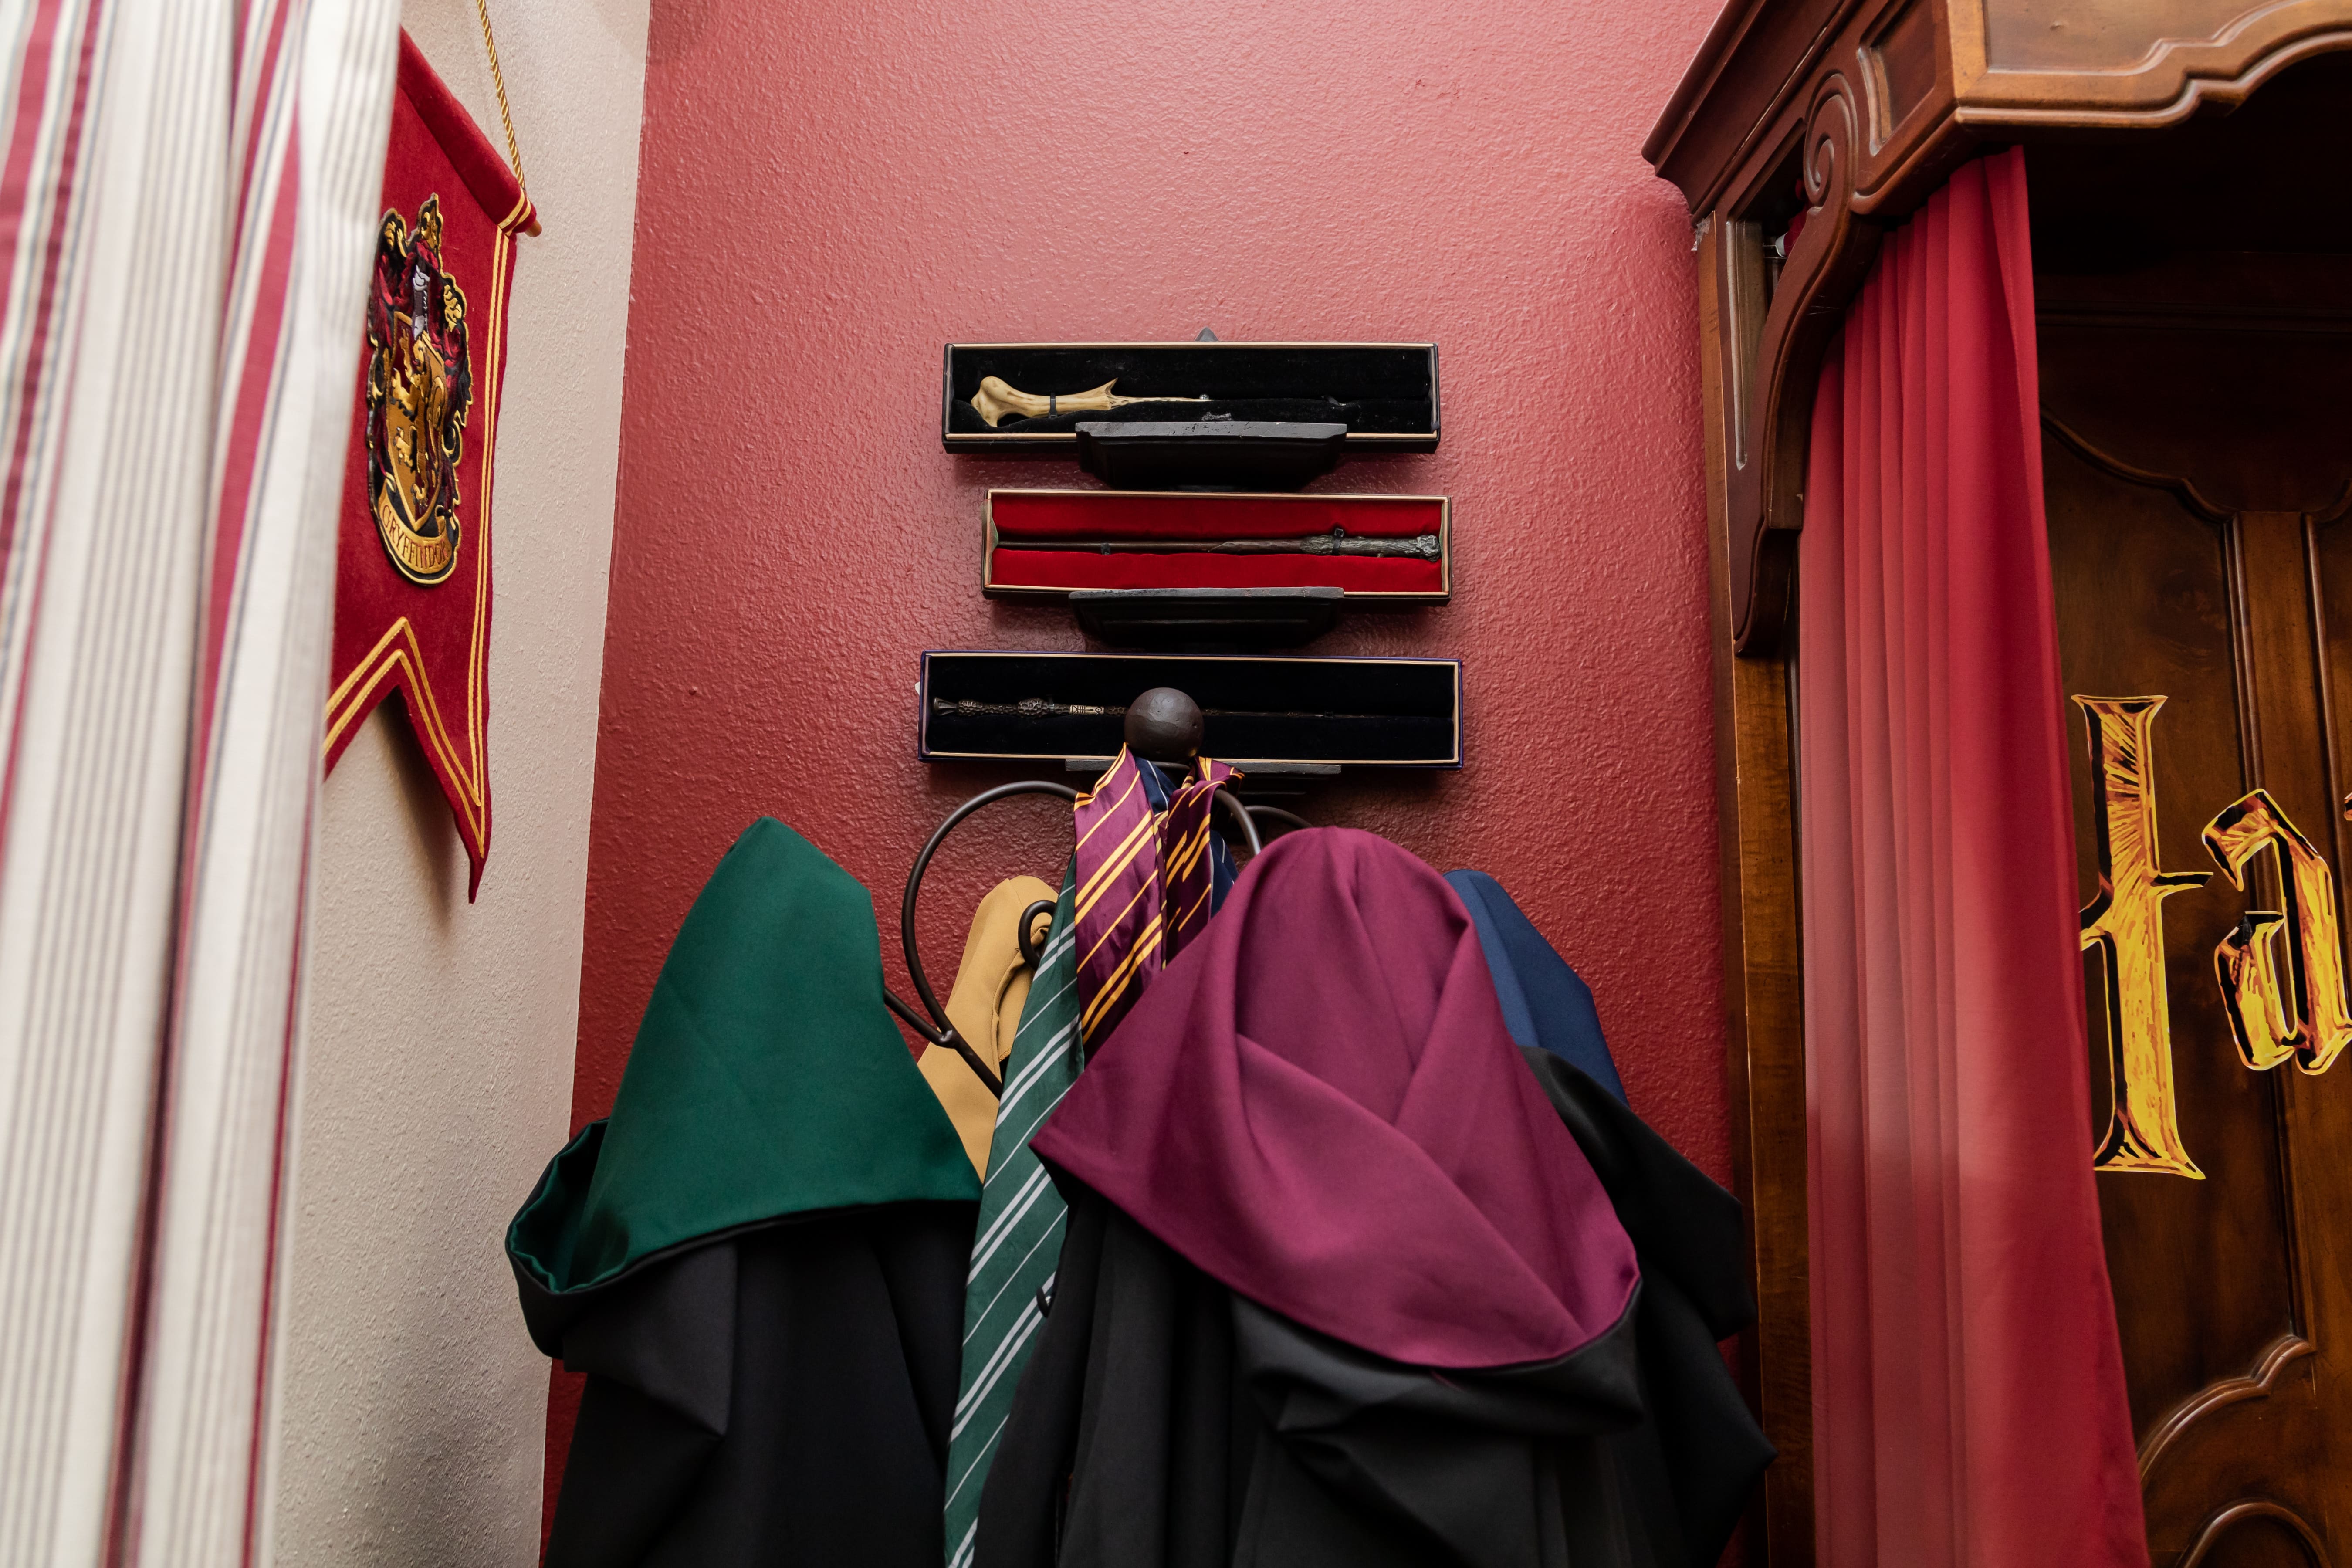 Find a dozen wands, HARRY POTTER robes, and adventure HERE!